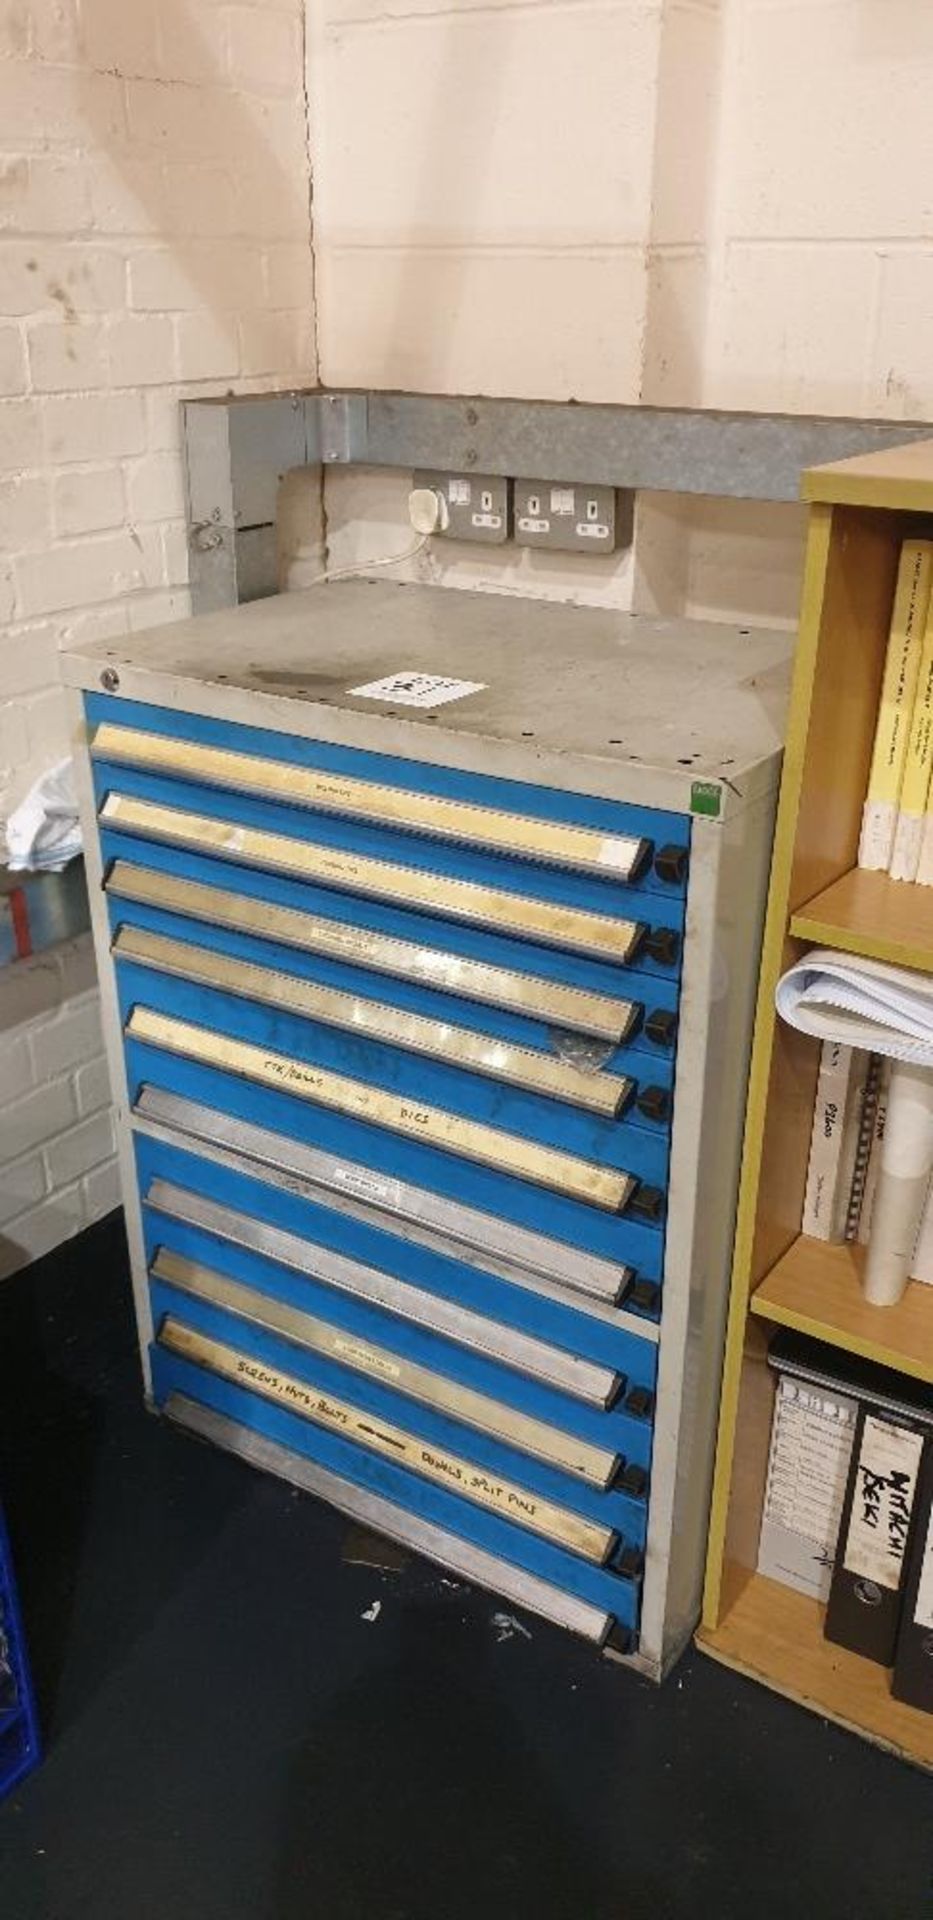 Bott 10 drawer tool cabinet and contents of milling tips, turning tips, taps and dies, drills, nuts,